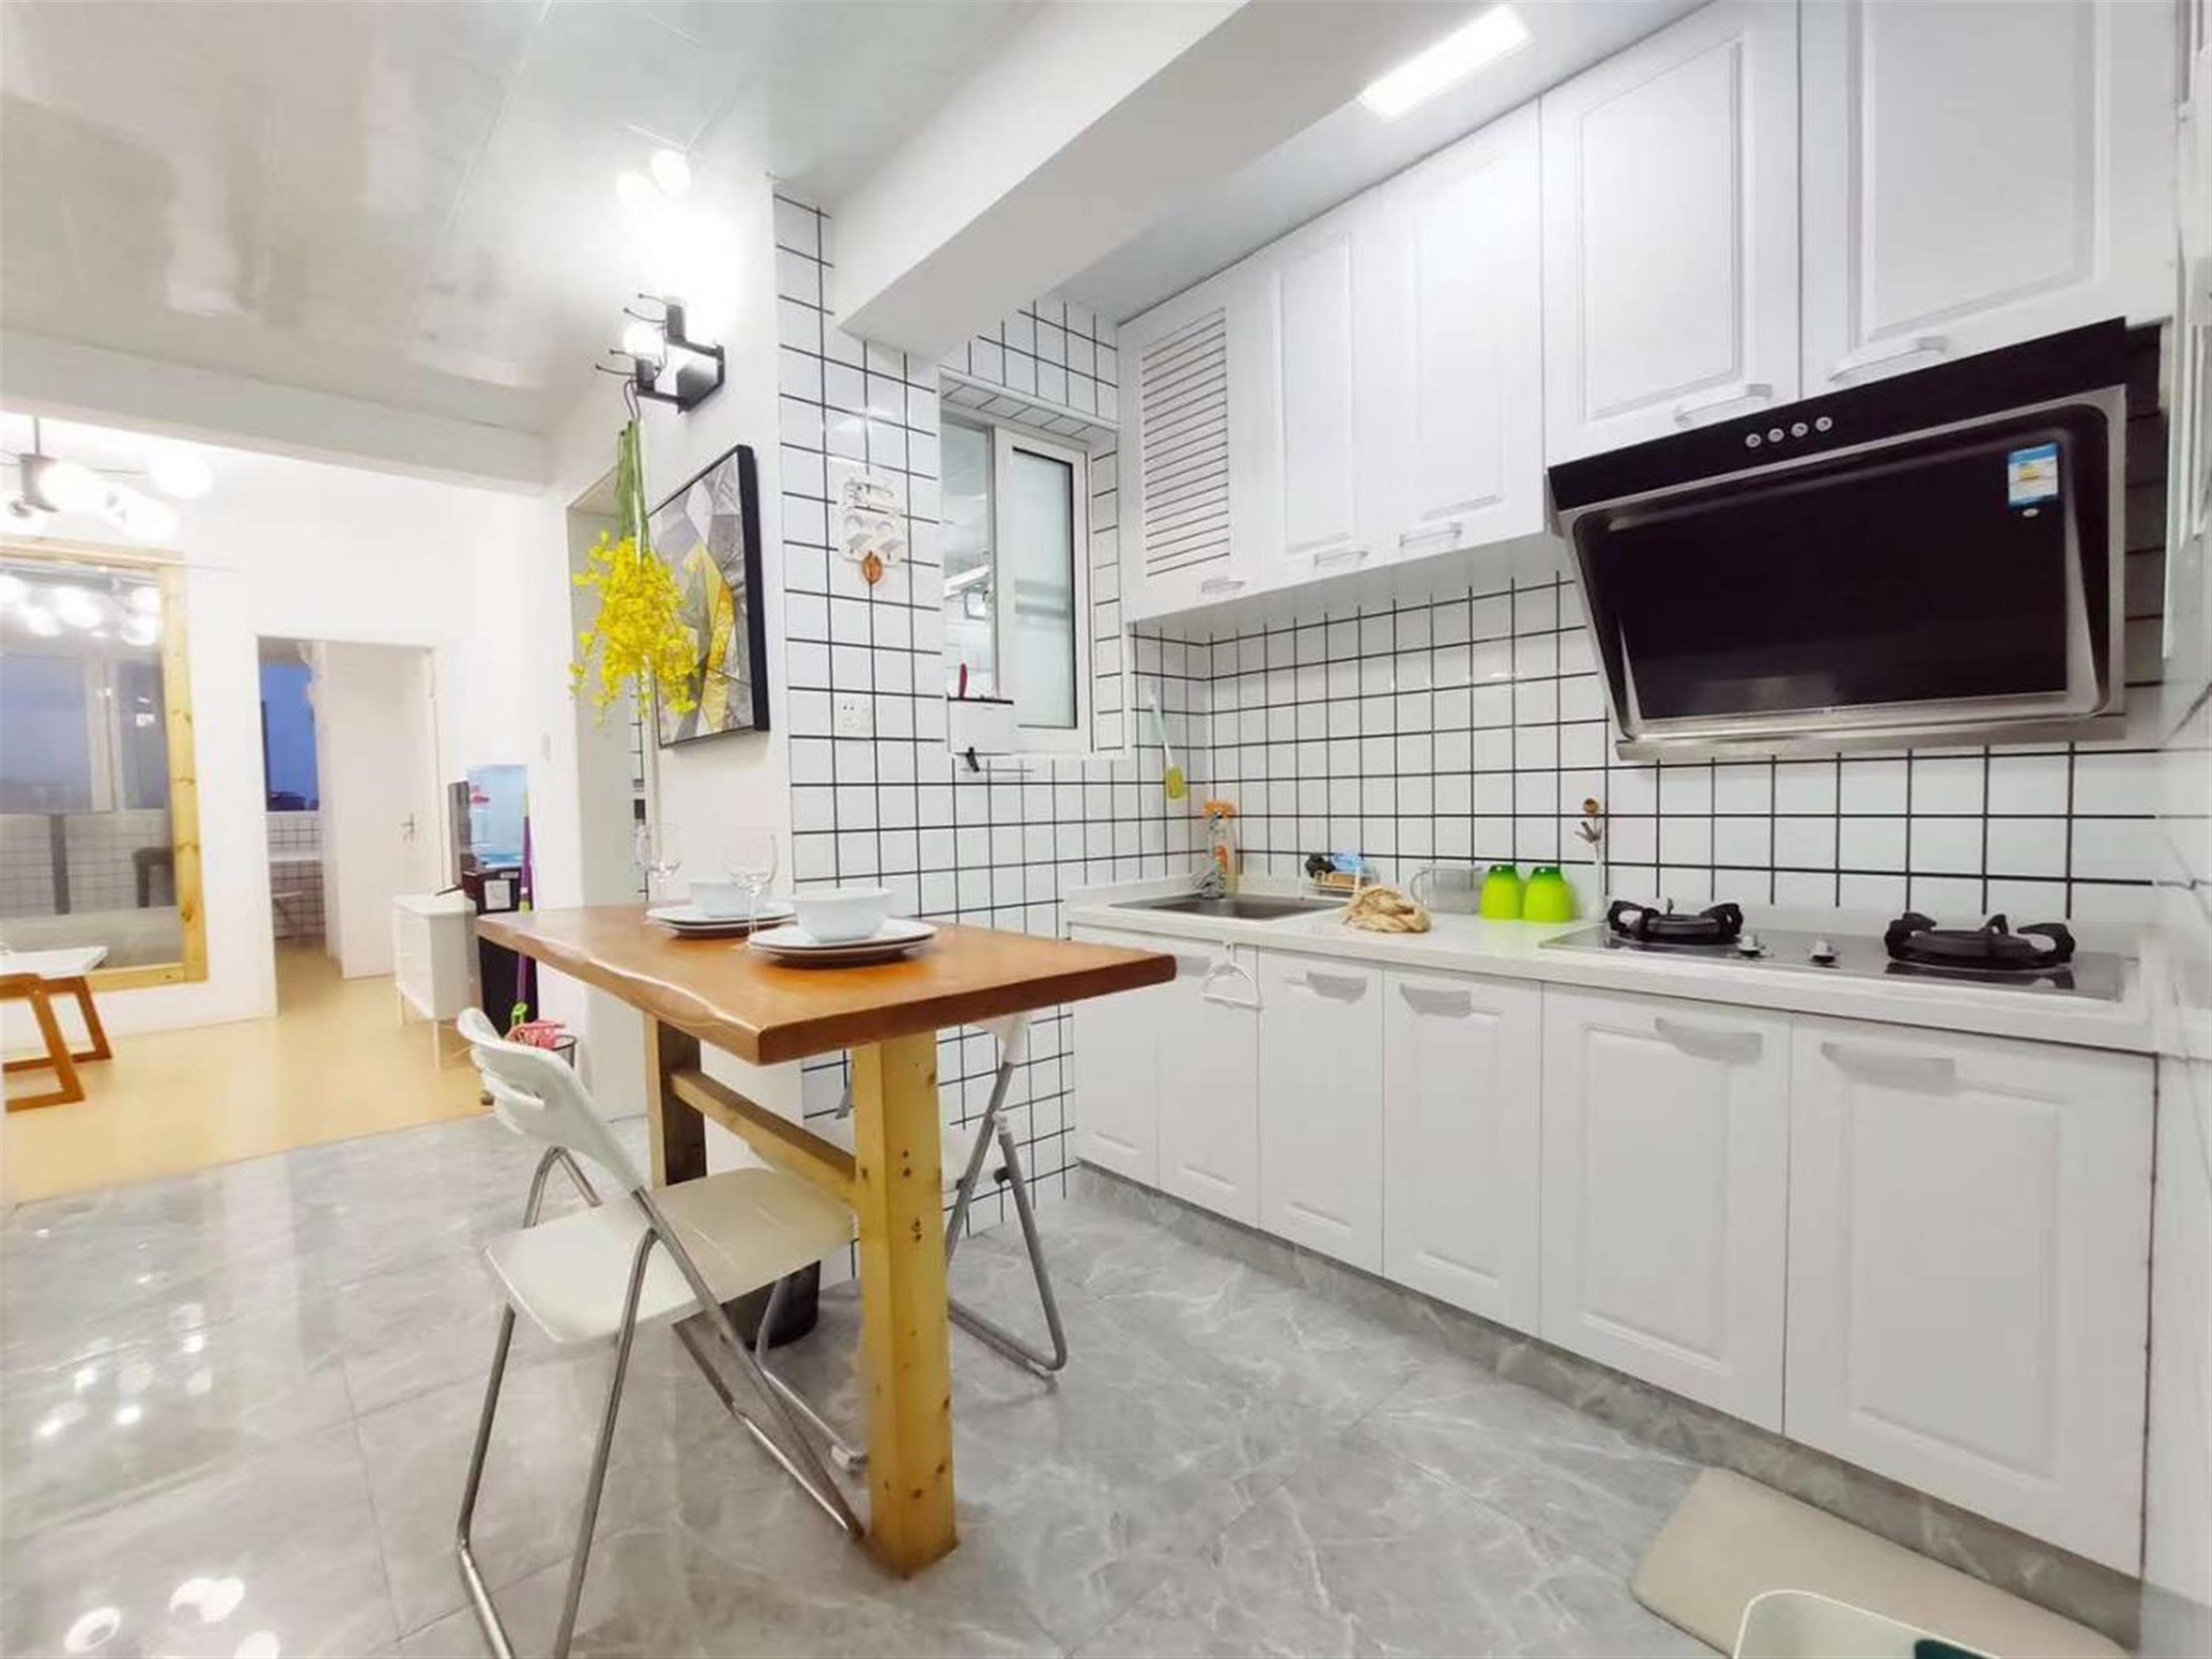 open kitchen Bright Clean Affordable Huaihai Road 2BR Apt Nr LN 1/10/12/13 for Rent in Shanghai